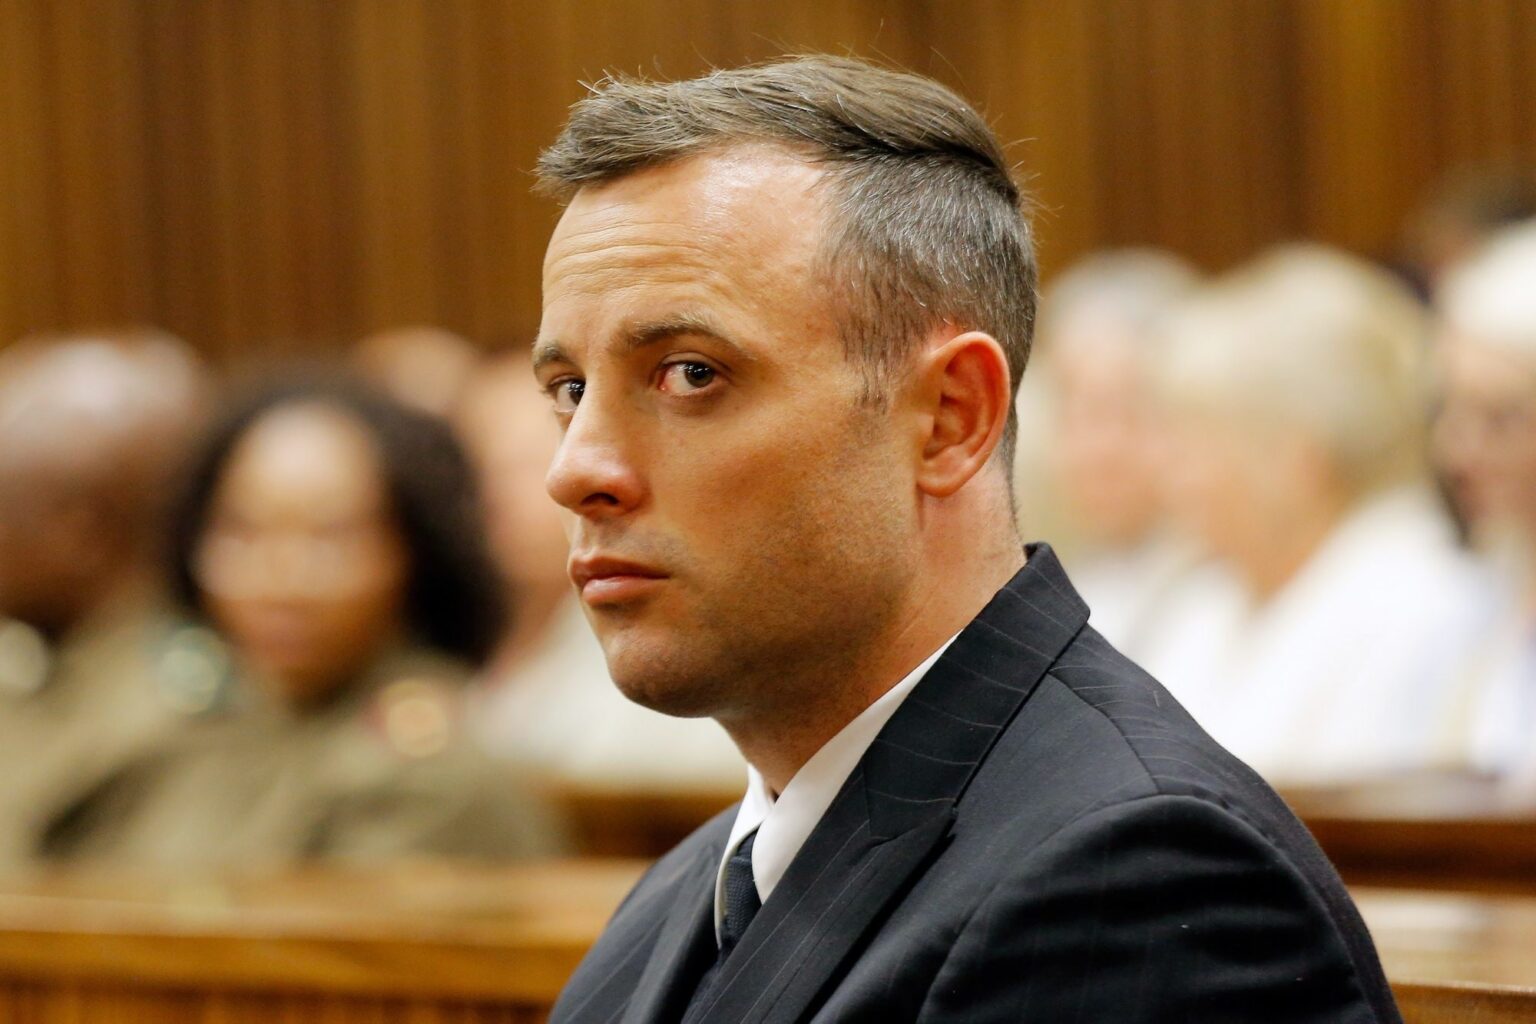 The BBC recently launched the trailer for a new documentary about Oscar Pistorius. Why is it disrespectful?